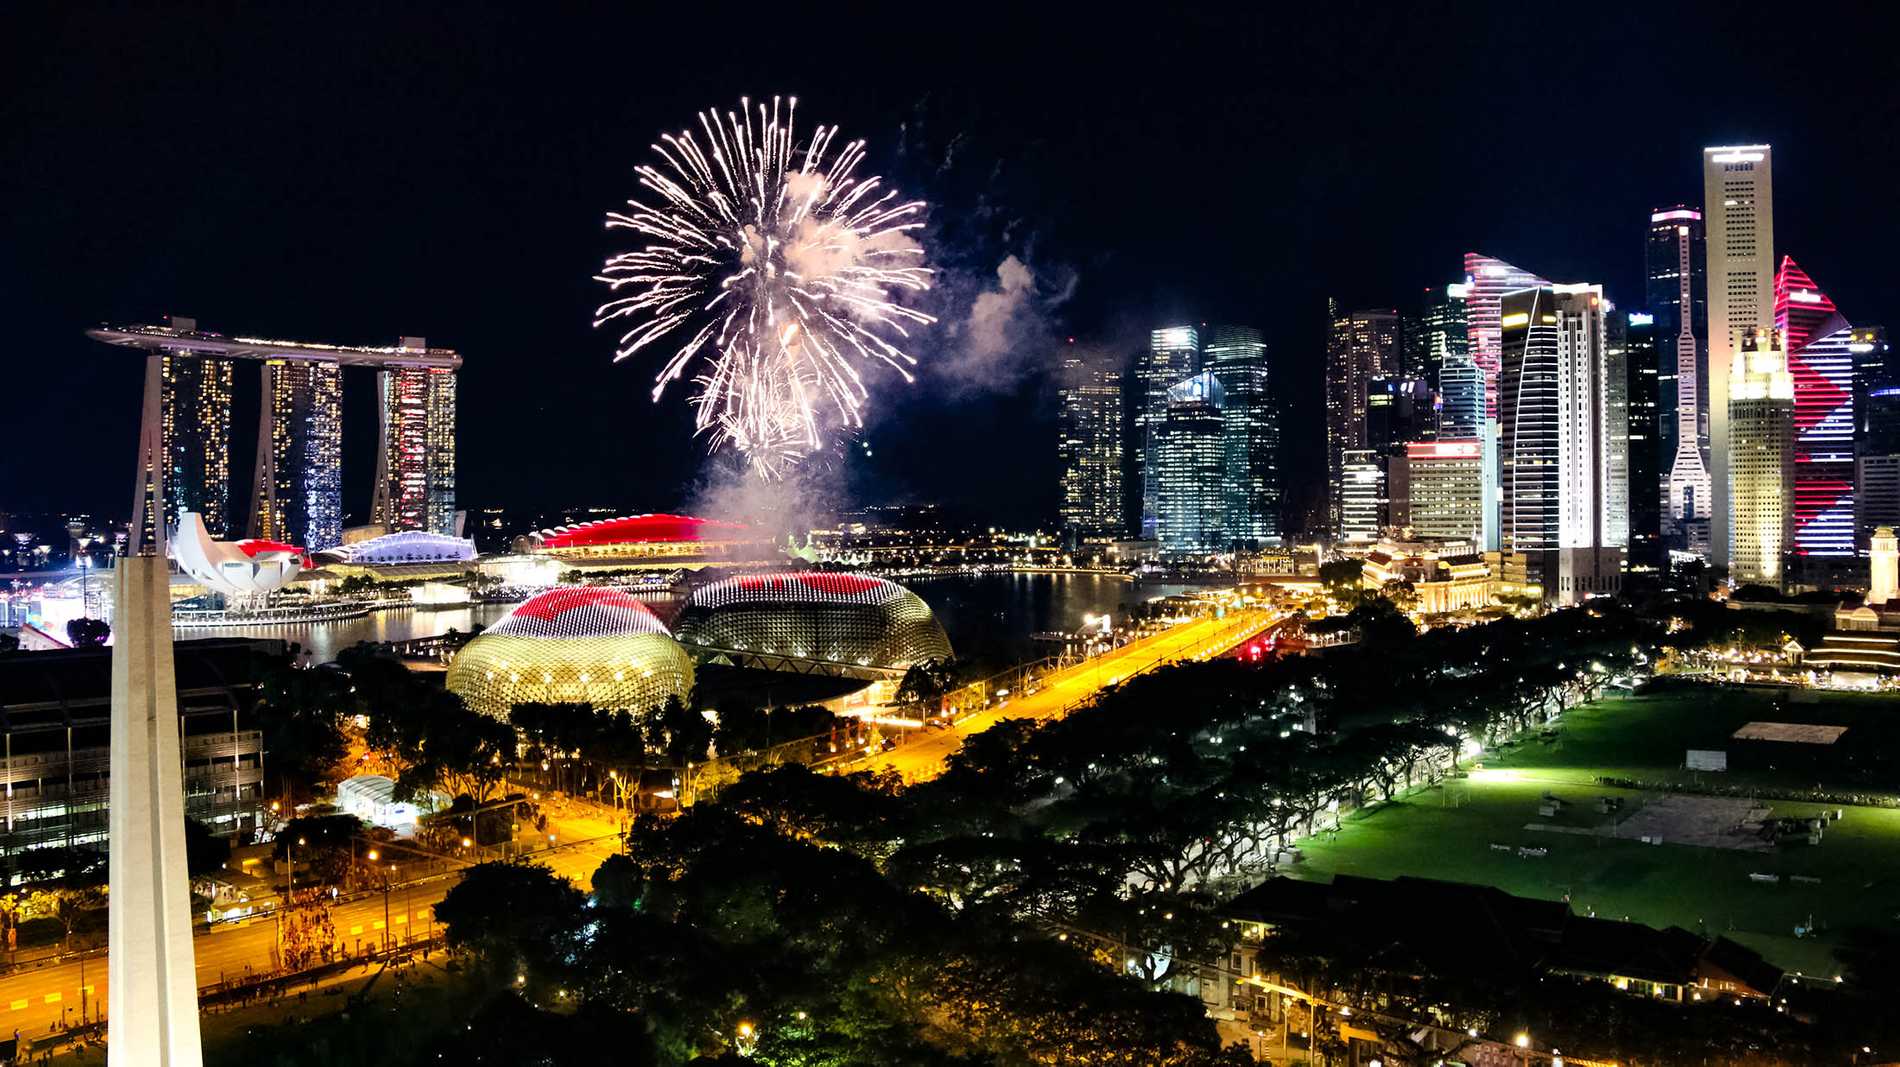 Marina Bay – Singapore: National Day takes place every year on August 9th to commemorate Singapore's independence from Malaysia in 1965. The festivities that take place around Marina Bay include; the National Day Parade, a military show and it all ends with a dazzling fireworks display.